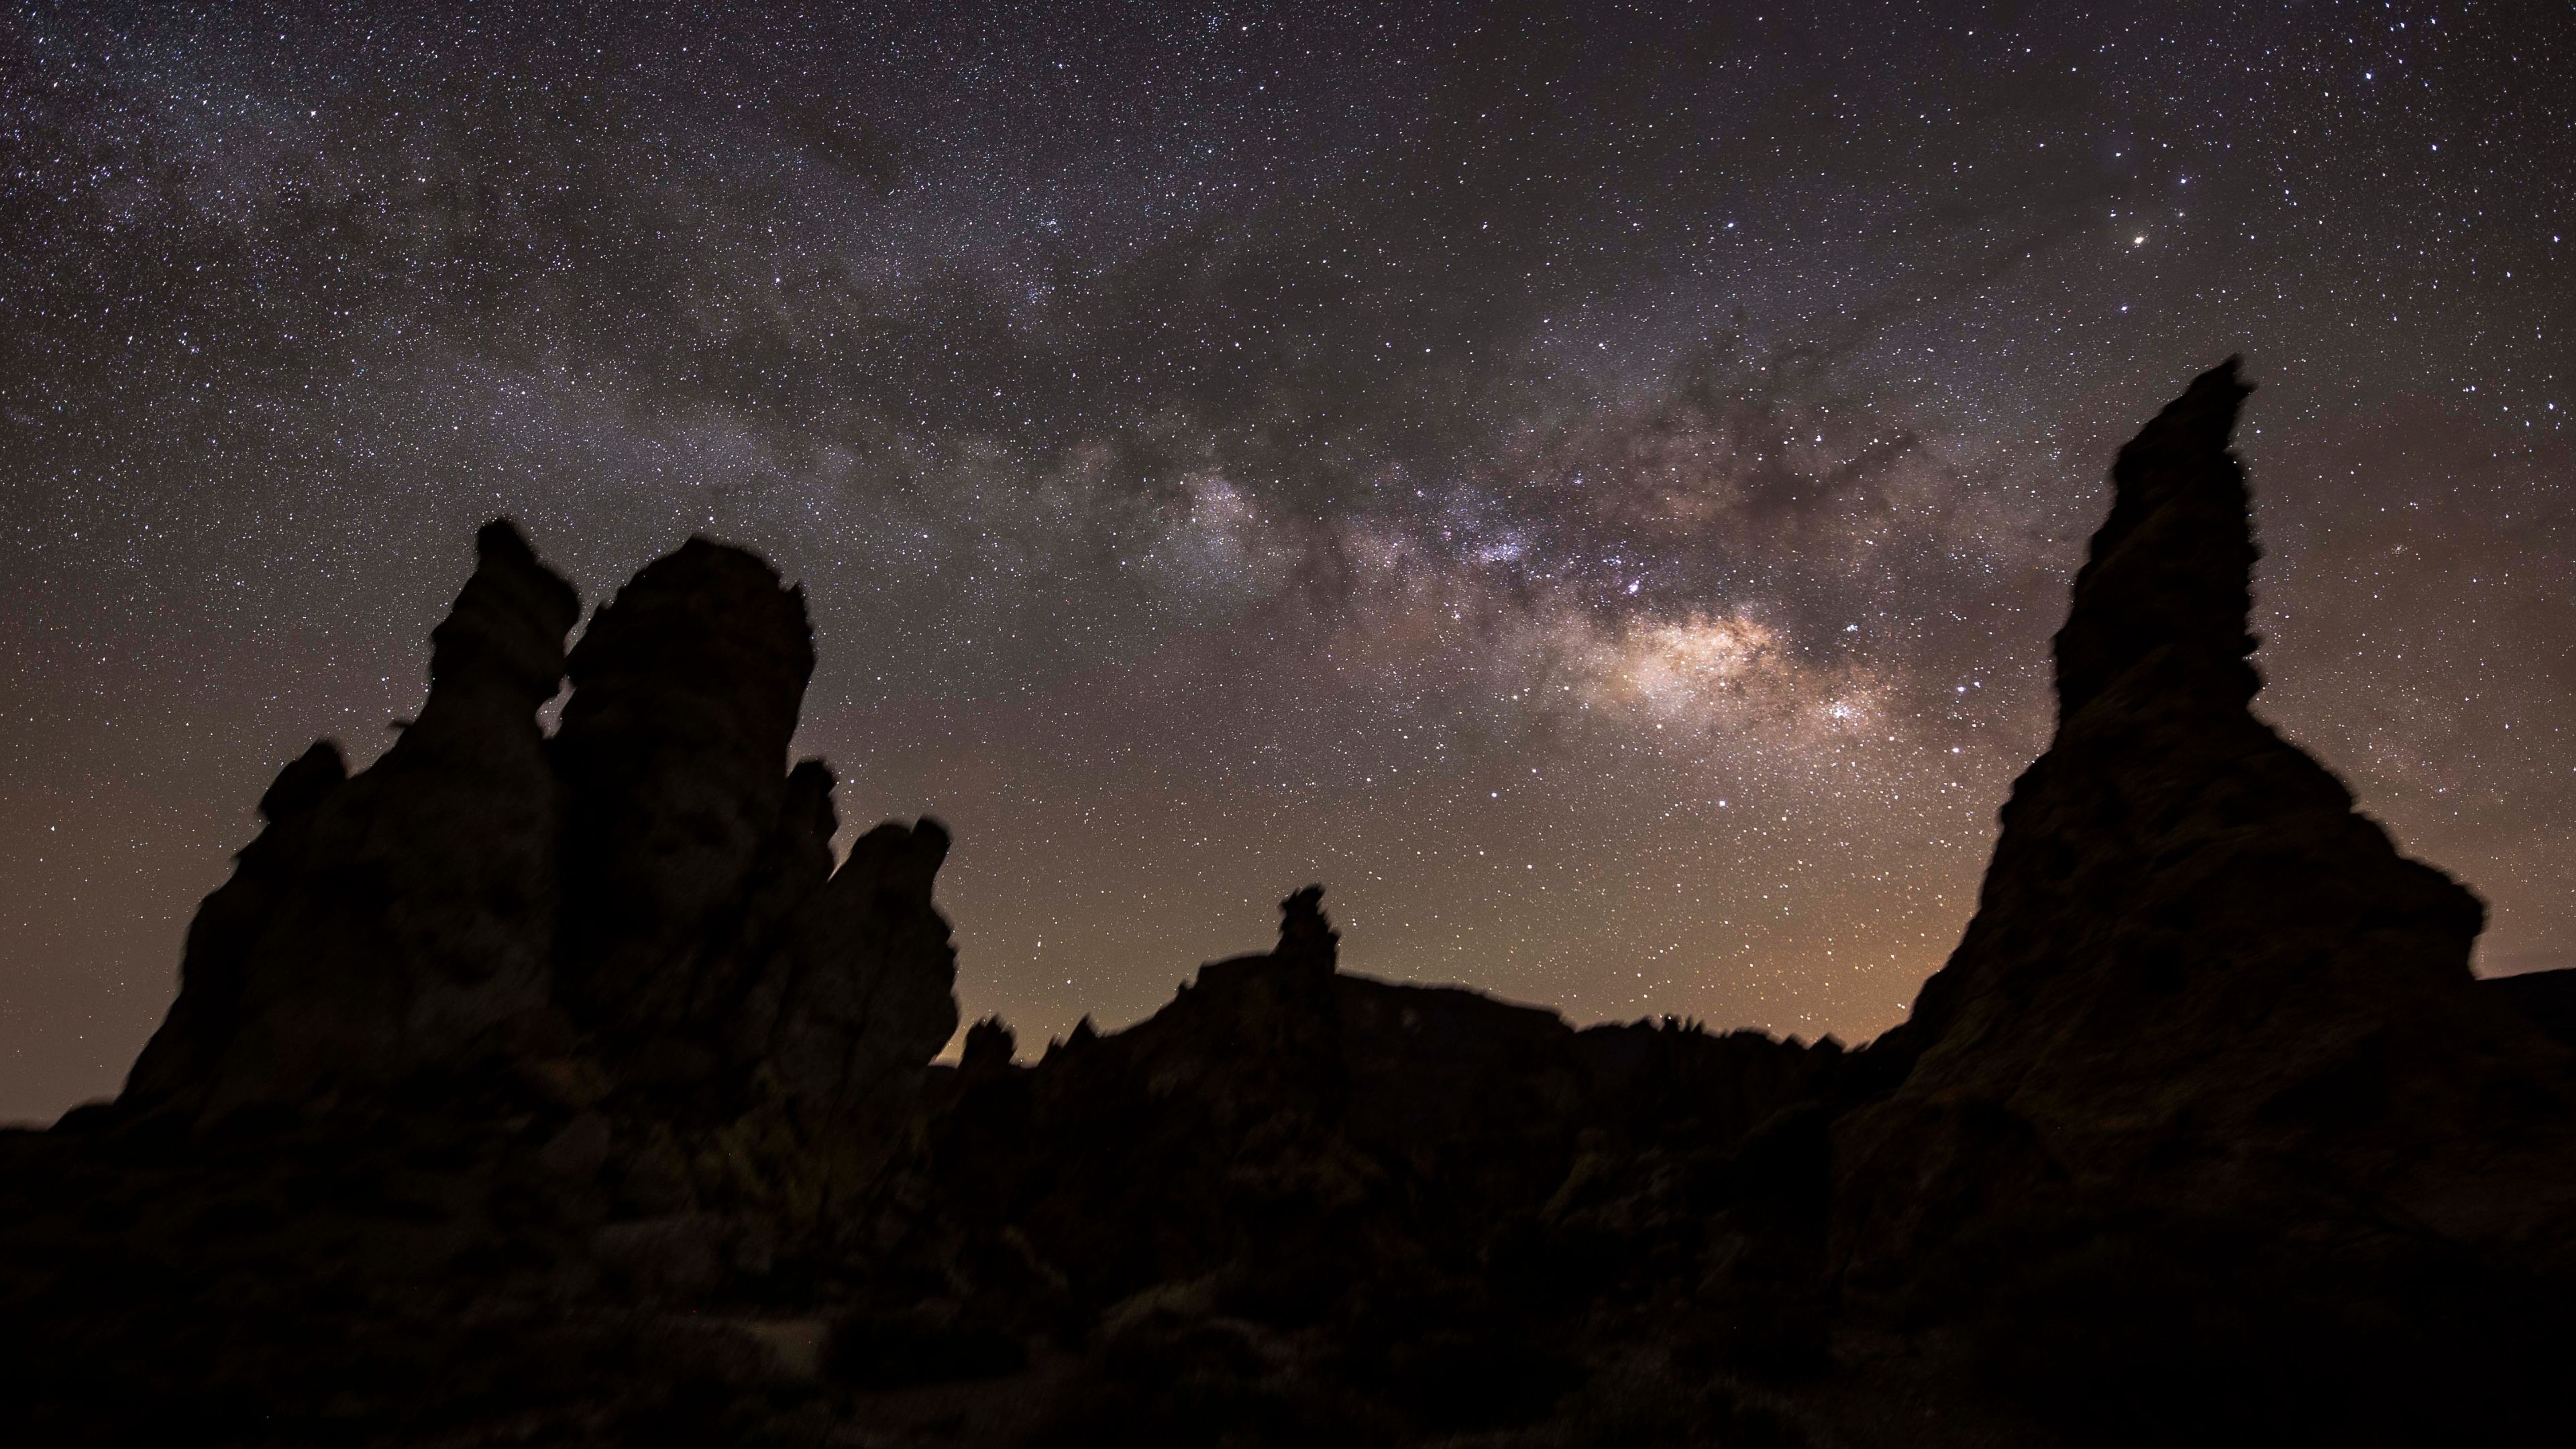 A photo of the a rocky landscape set against the galactic core of the Milky Way in the sky above.